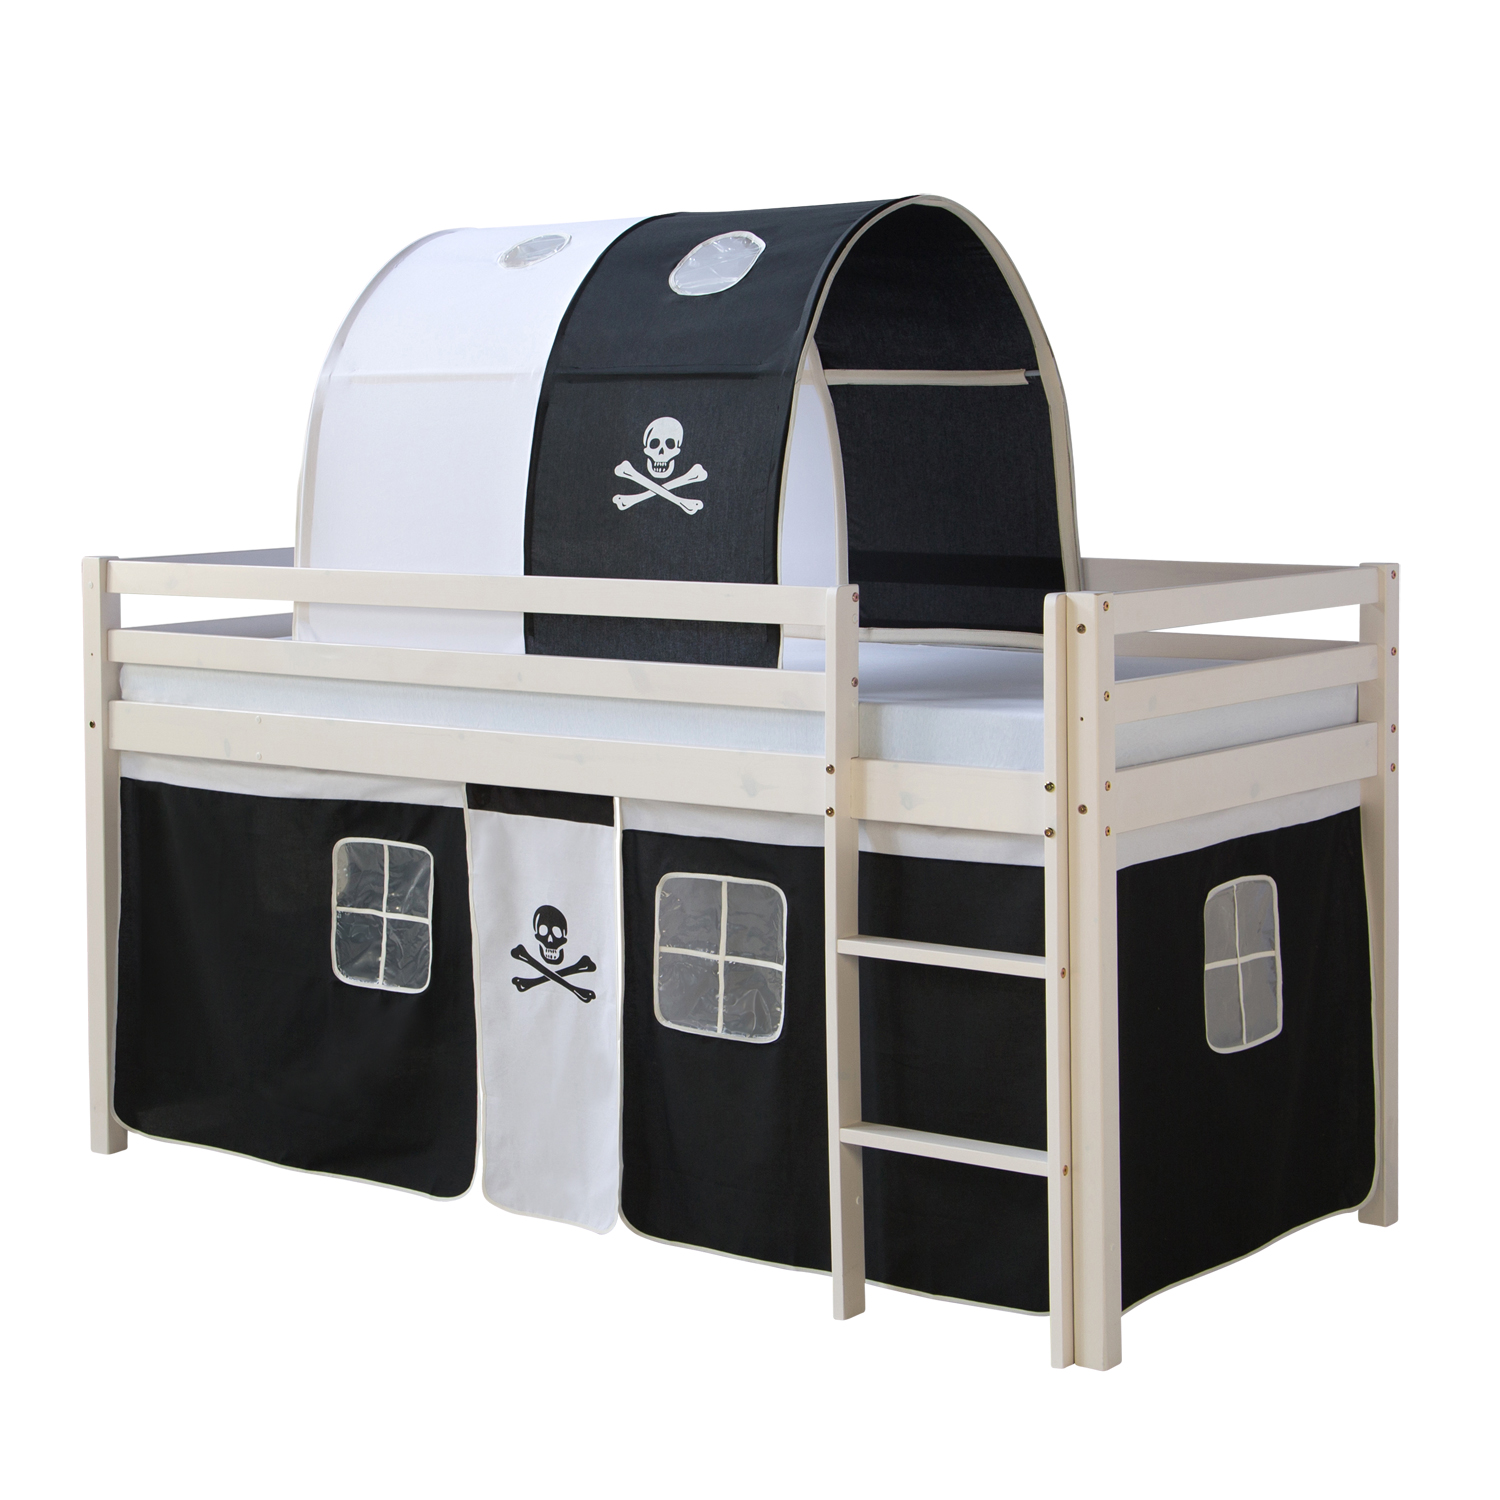 Loftbed 90x200 cm Bunk bed Childrens bed Solid Pine Wood Tower Tunnel Curtain Black Pirate Slide Mattress Slats